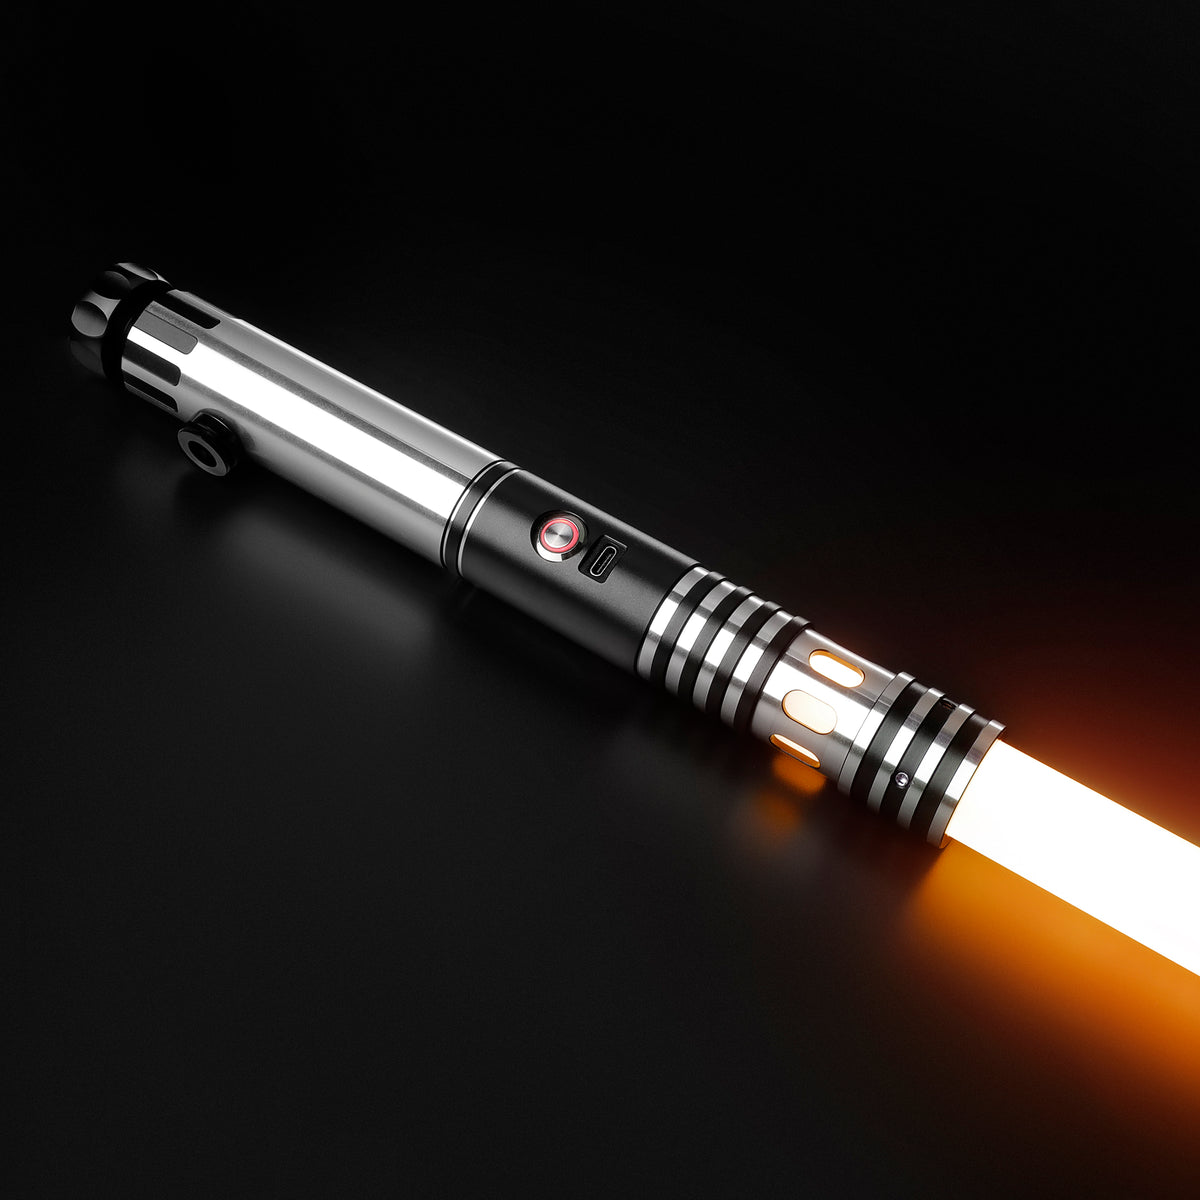 SaberCustom Xenopixel v3 Lightsaber Dueling Light Saber with Motion Control and Smooth Swing HX011